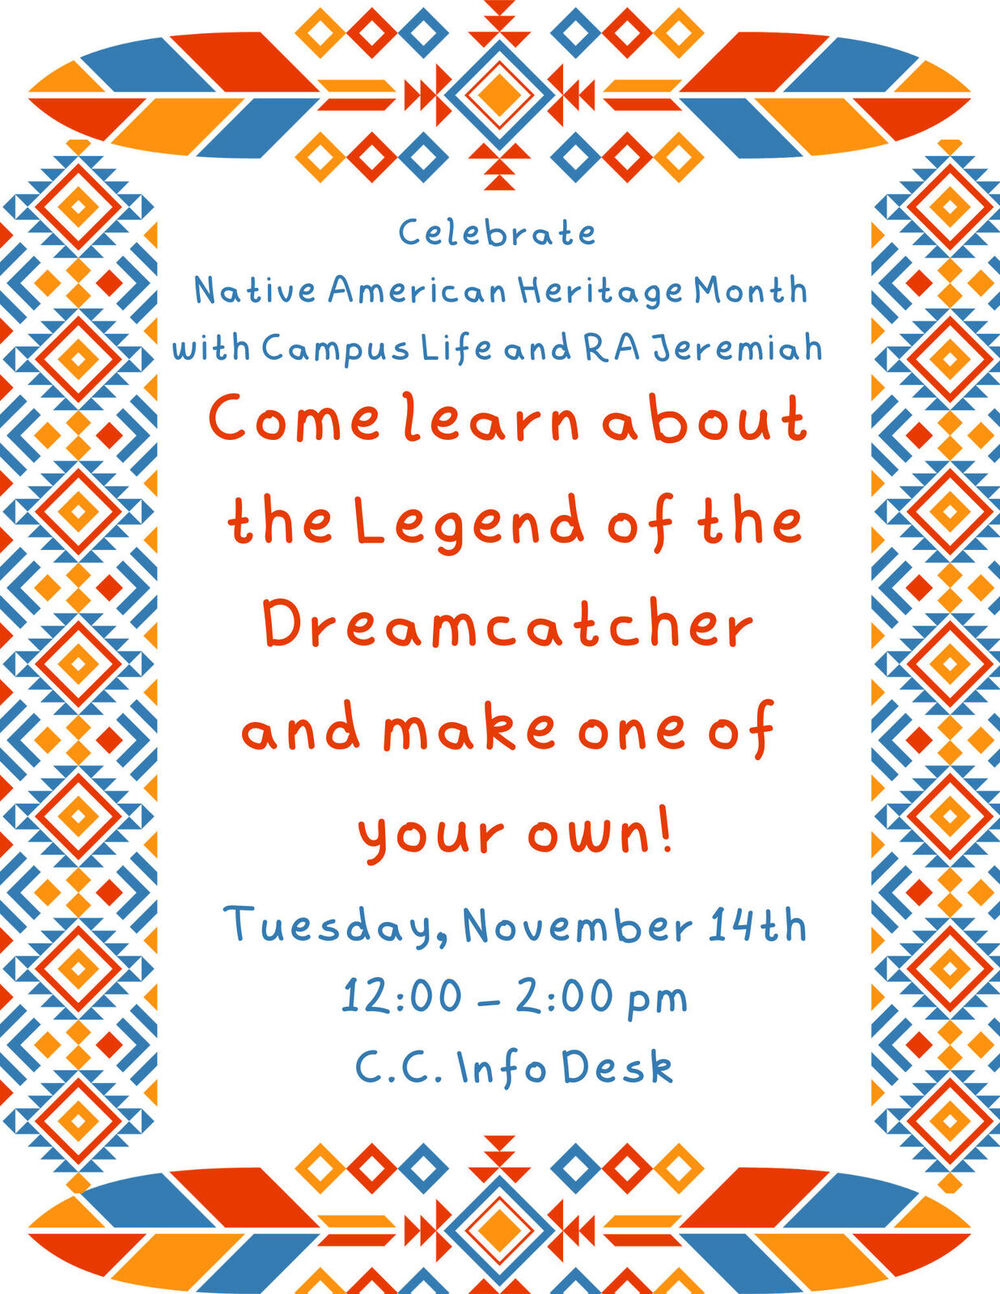 native-american-heritage-month-learn-about-the-legend-of-the-dreamcatcher